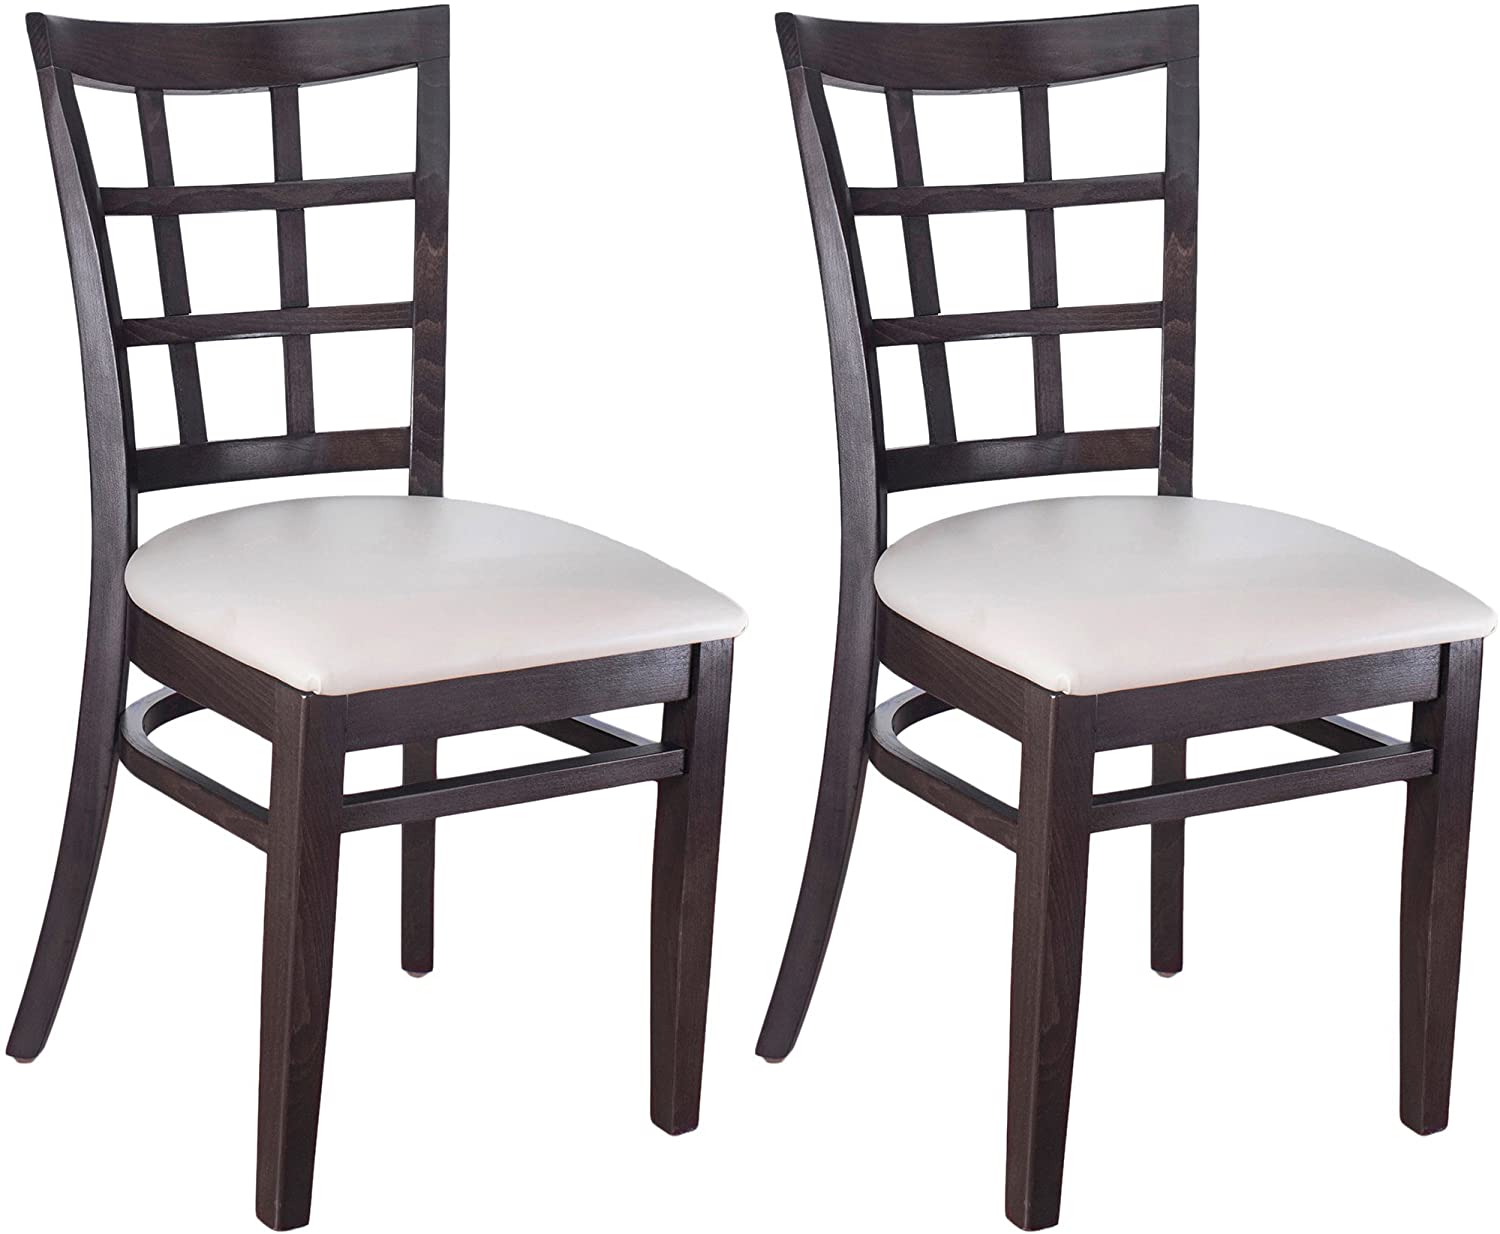 B01N09M9EP Beechwood Mountain BSD-17S-W Solid Beech Wood Side Chairs in Walnut for Kitchen & Dining, Set of 2, NA